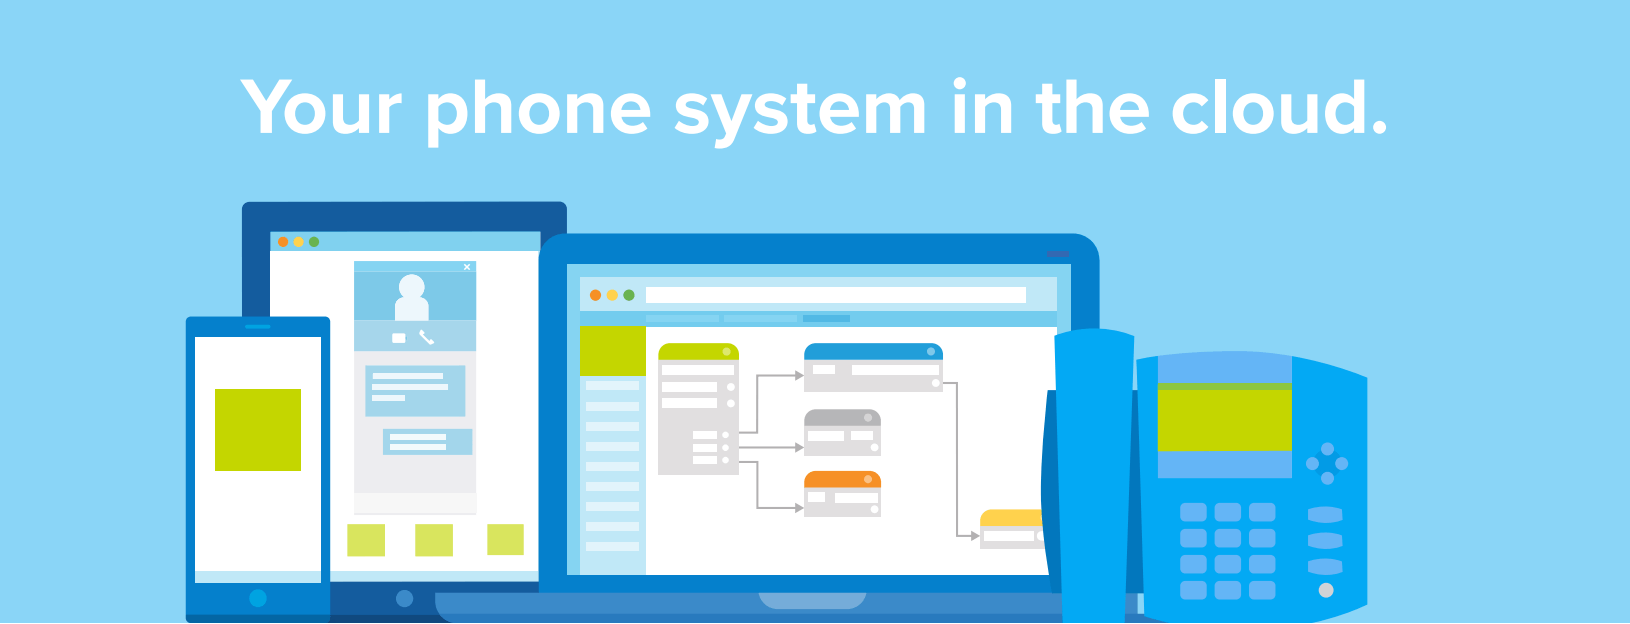 Your phone system in the cloud